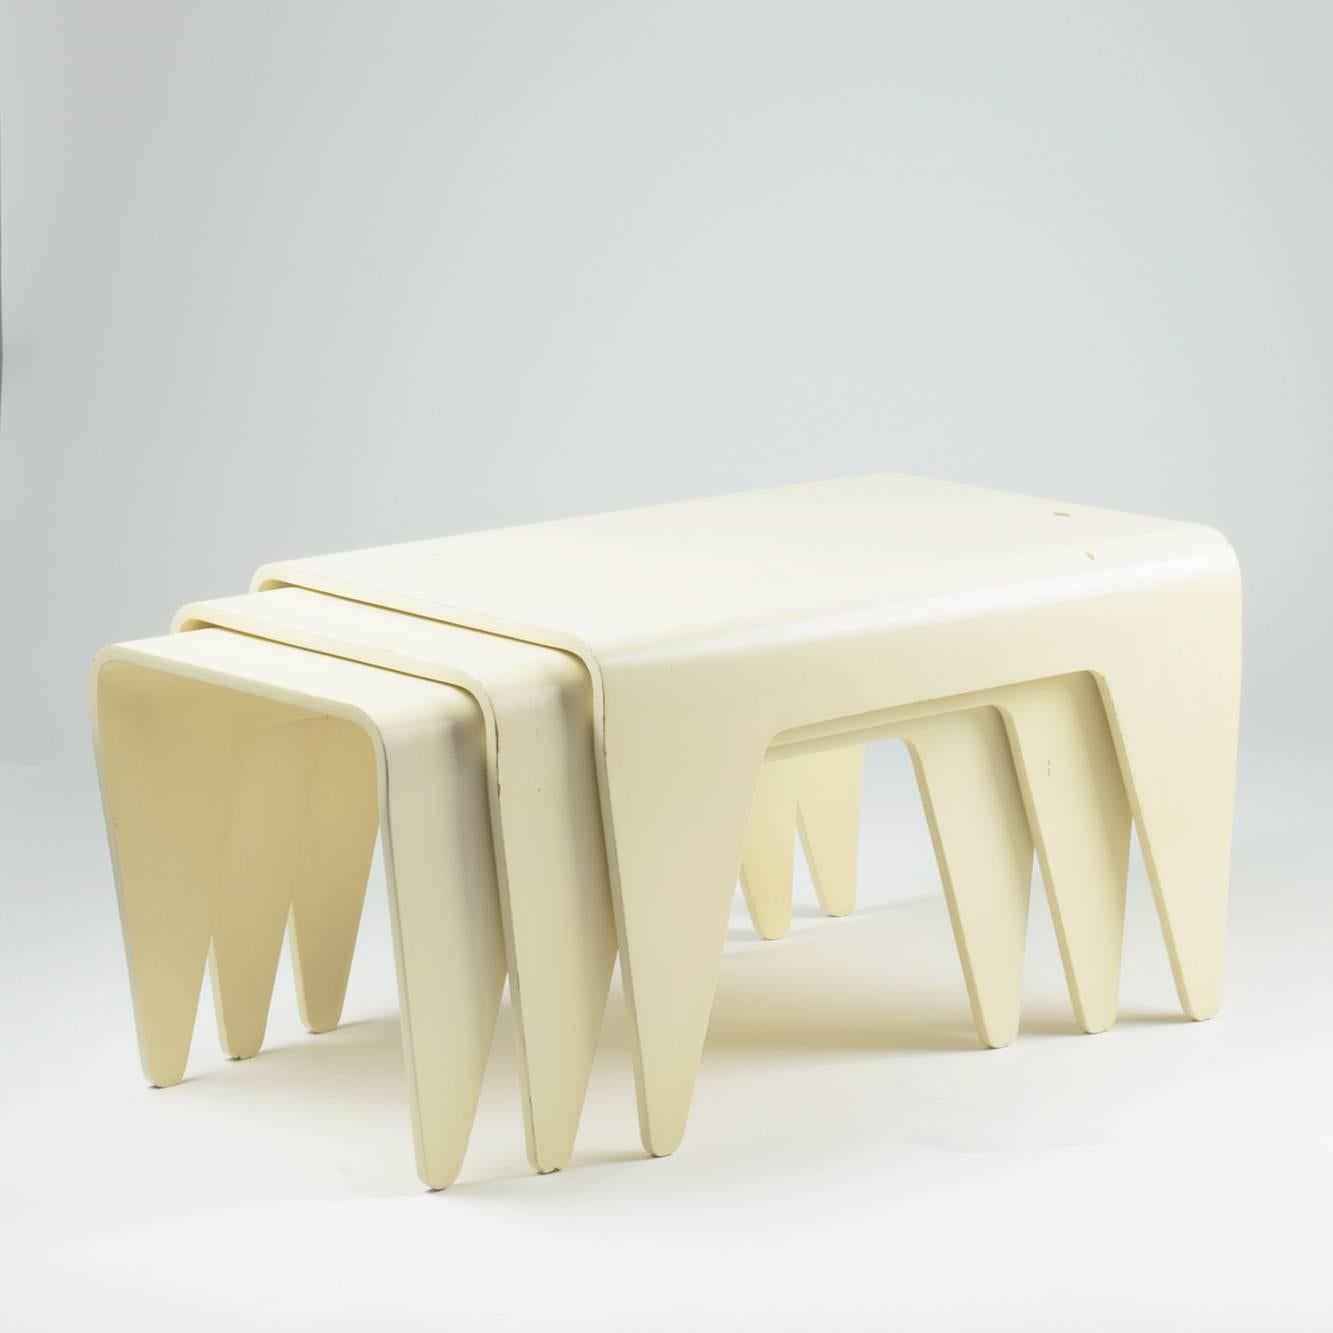 Marcel Breuer,
Isokon (manufacturer), London UK

'Isokon Tables' designed 1936.

Set of three nesting tables.
Cream-white lacquered plywood.
Stunning rare set in good original condition.

(References: Modernist, organic Modernism, plywood,